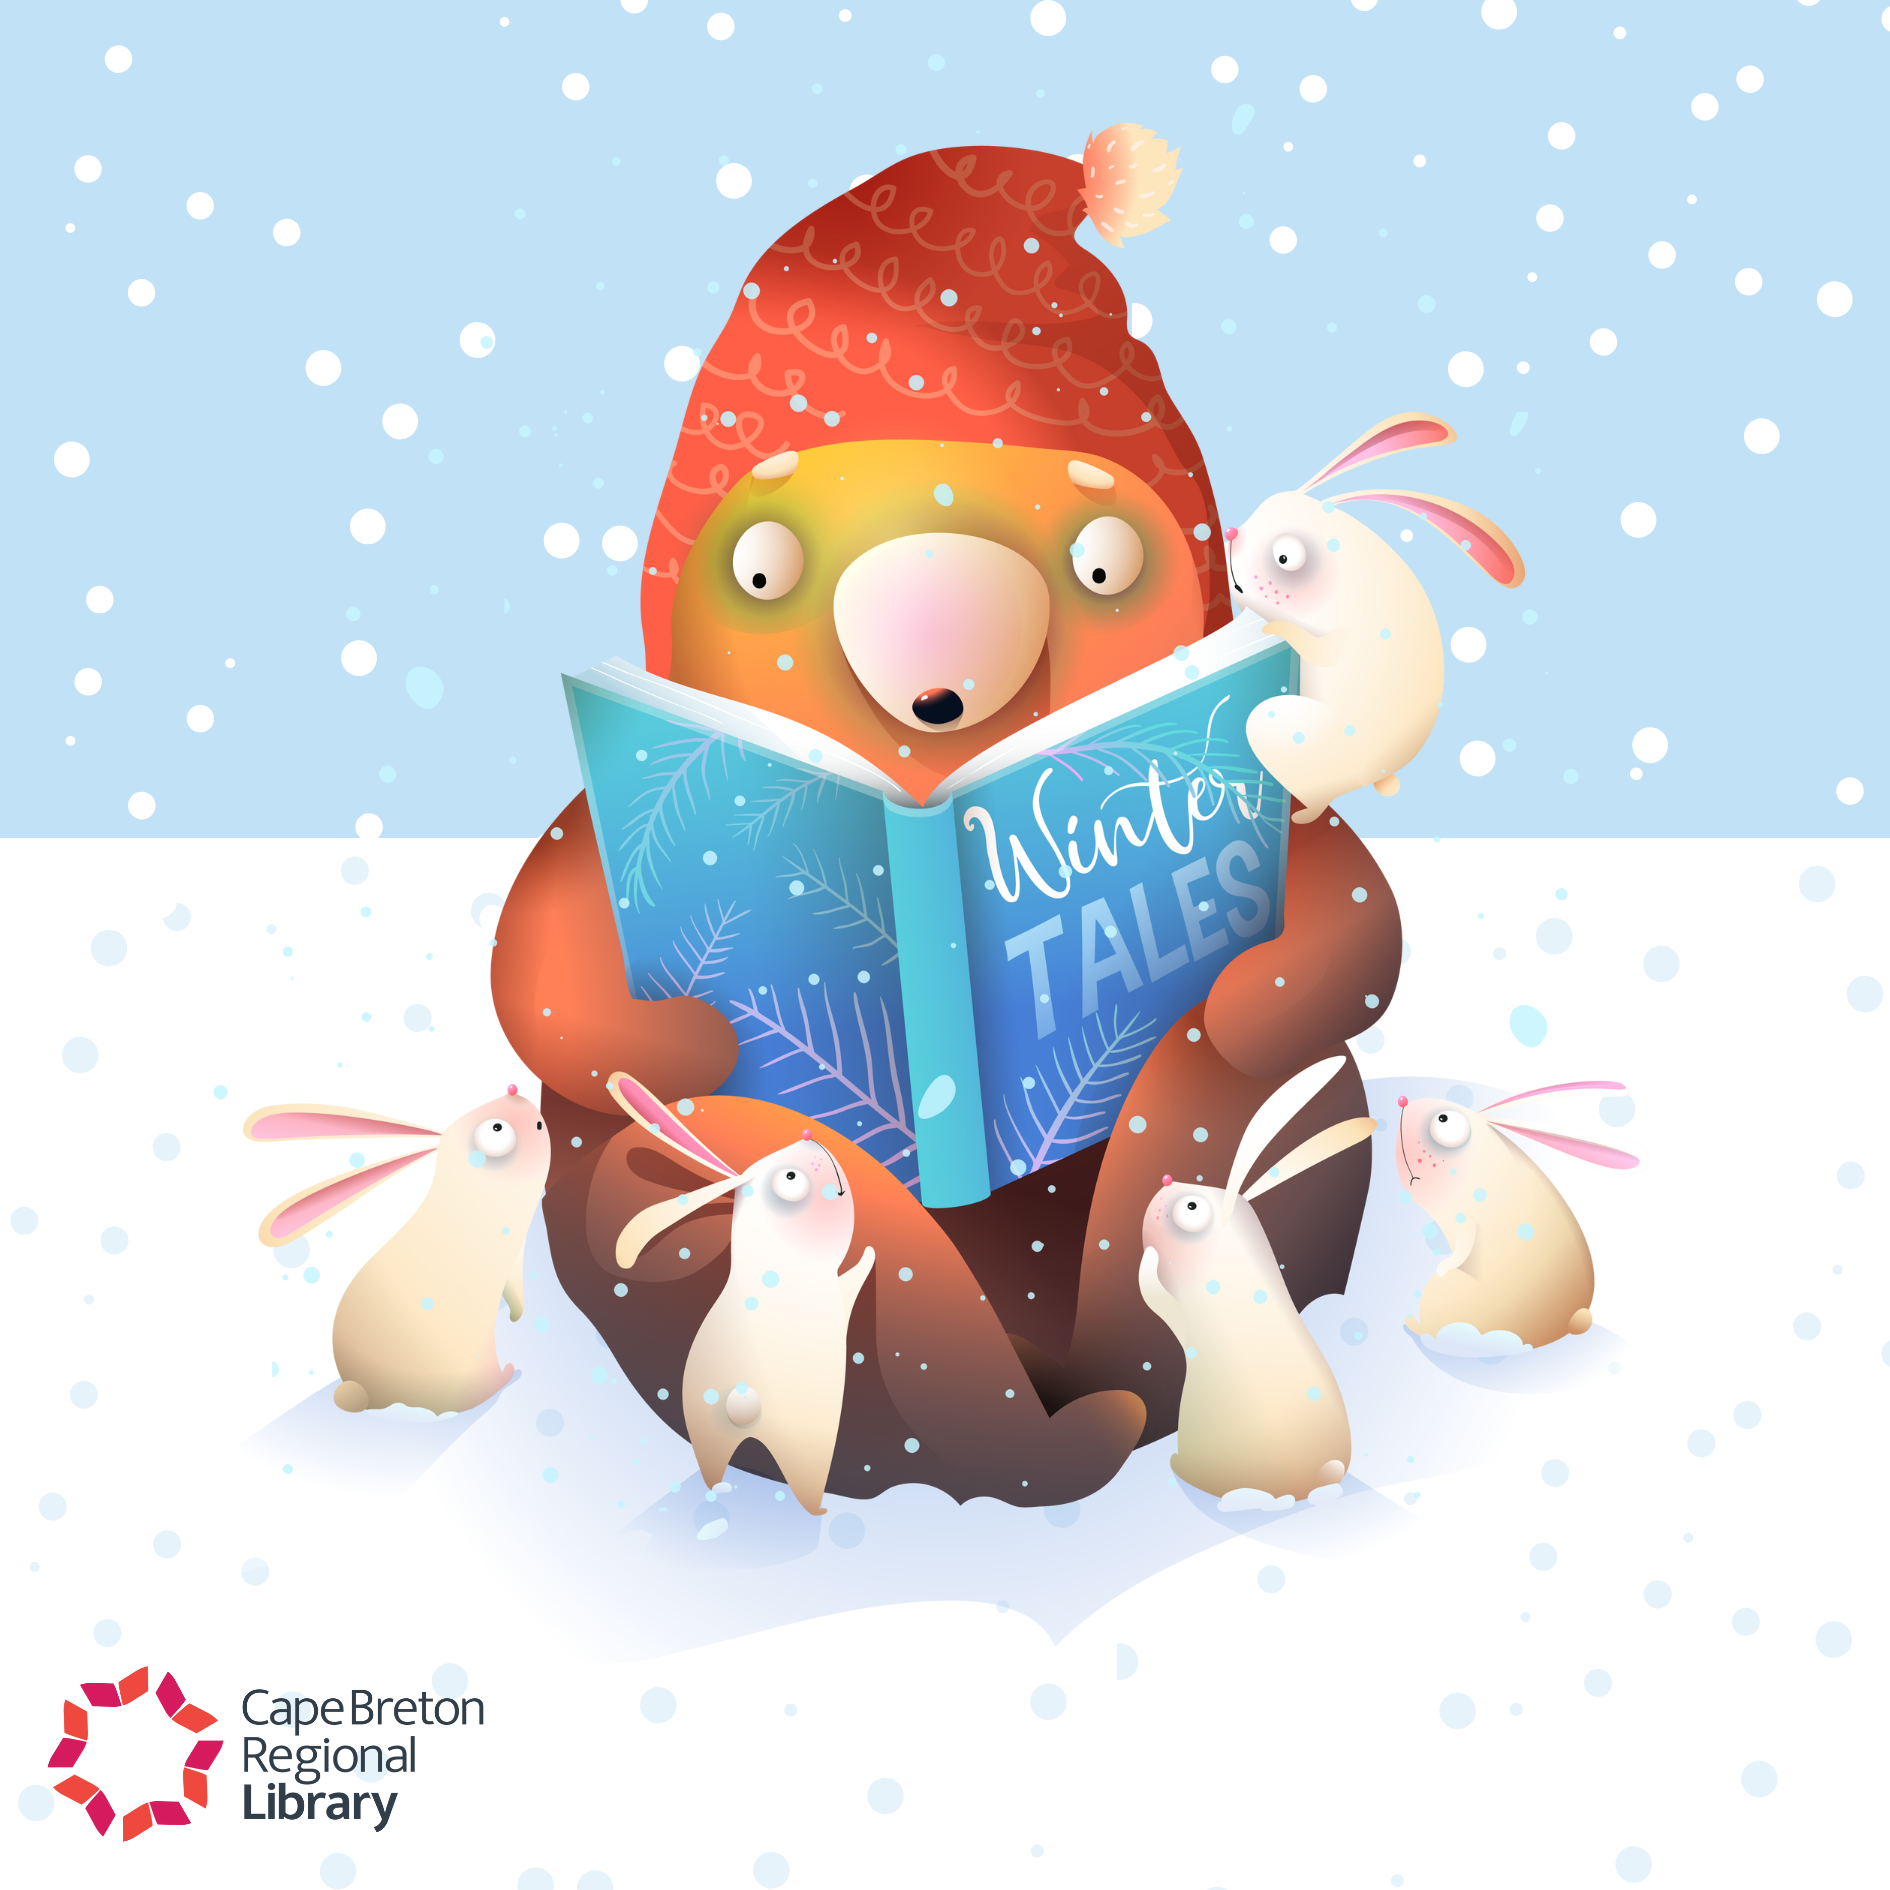 Graphic of a Bear in the snow reading a book titled "Winter Tales" white bunnies surrounding the bear listening to the story.